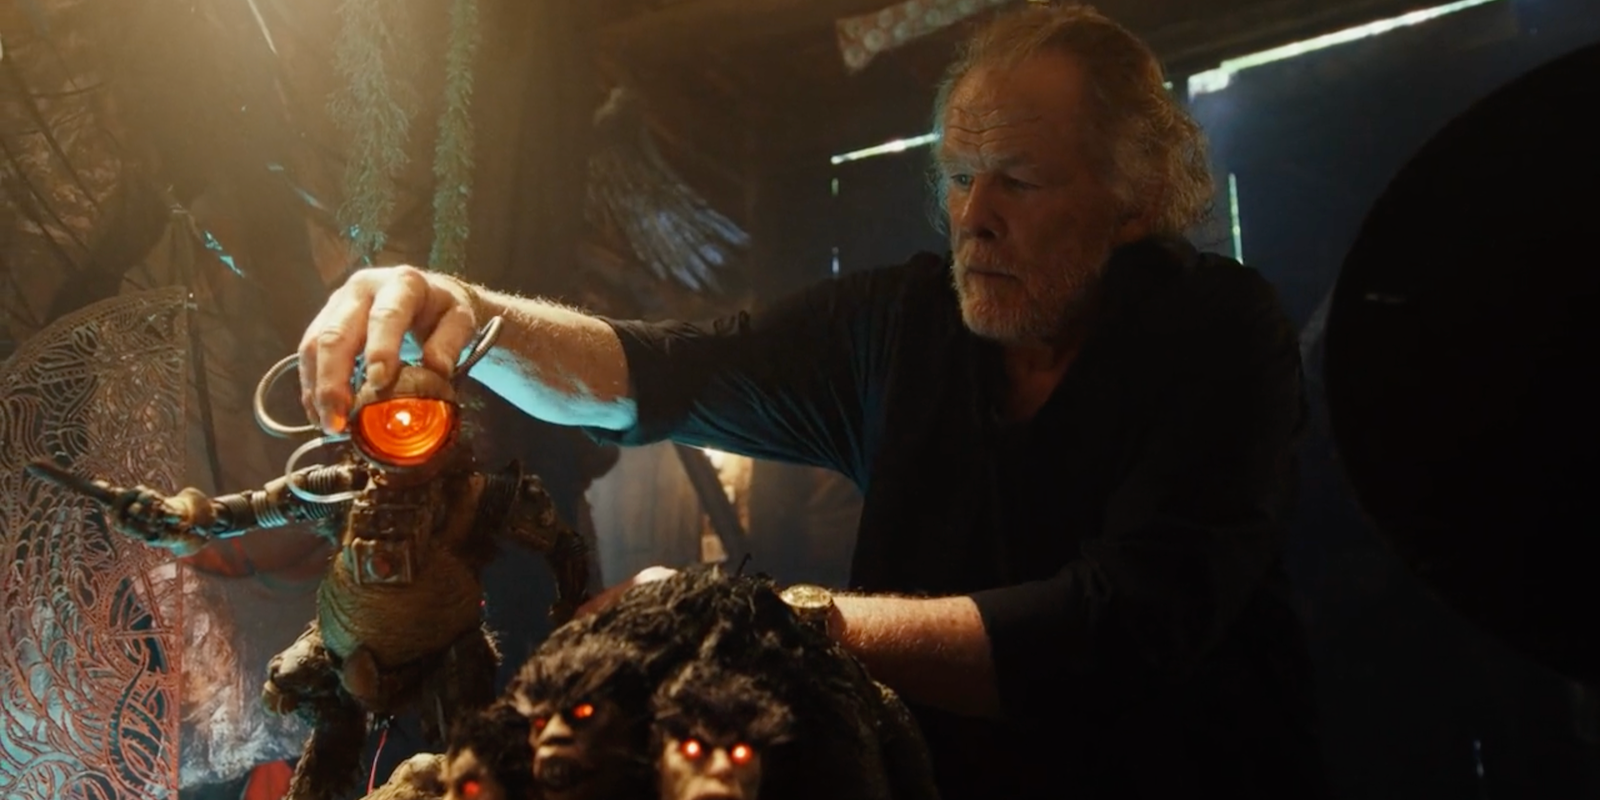 Nick Nolte working on his model creatures in Poker Face